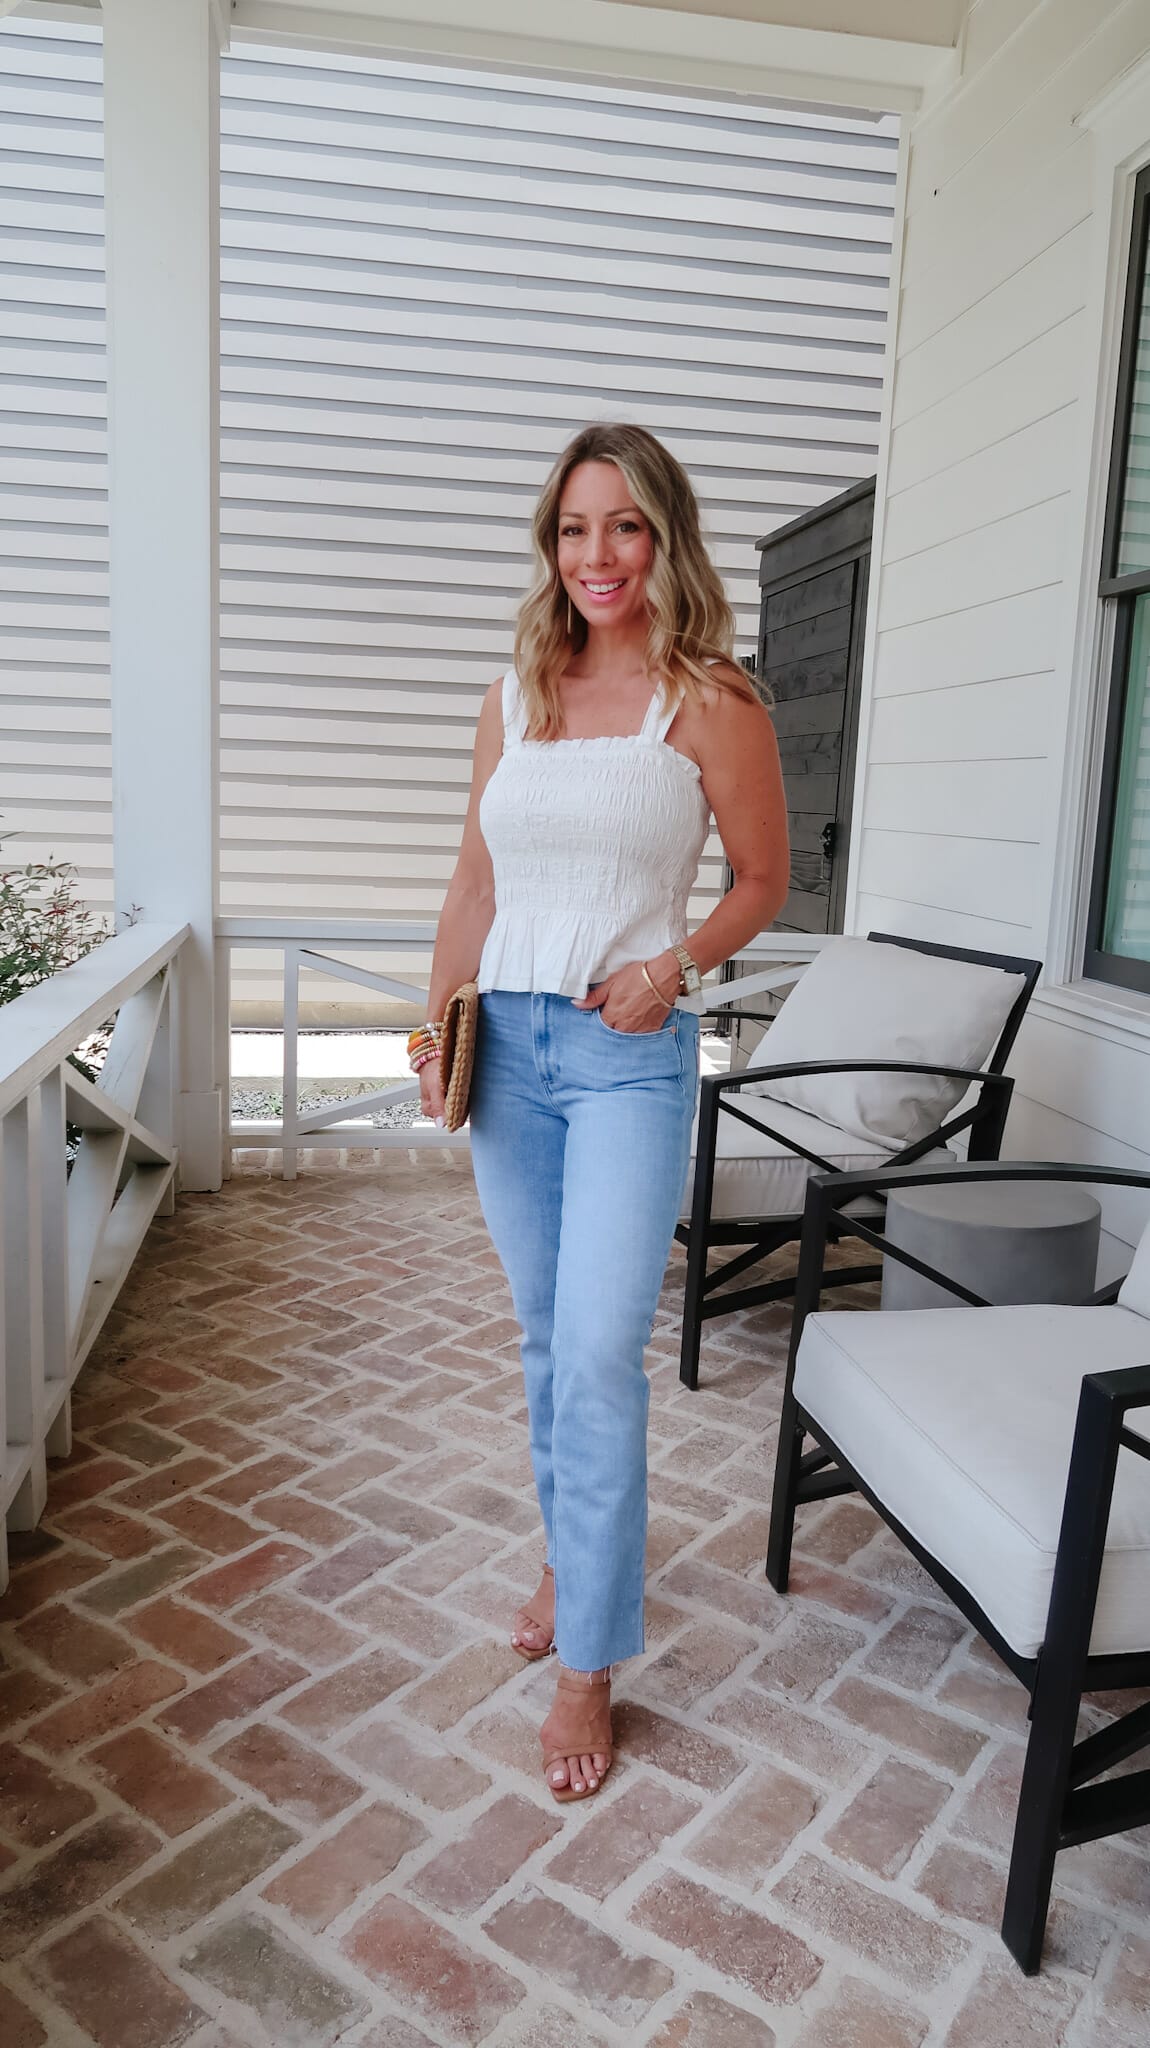 White Smocked Top, Jeans, Sandals. Clutch